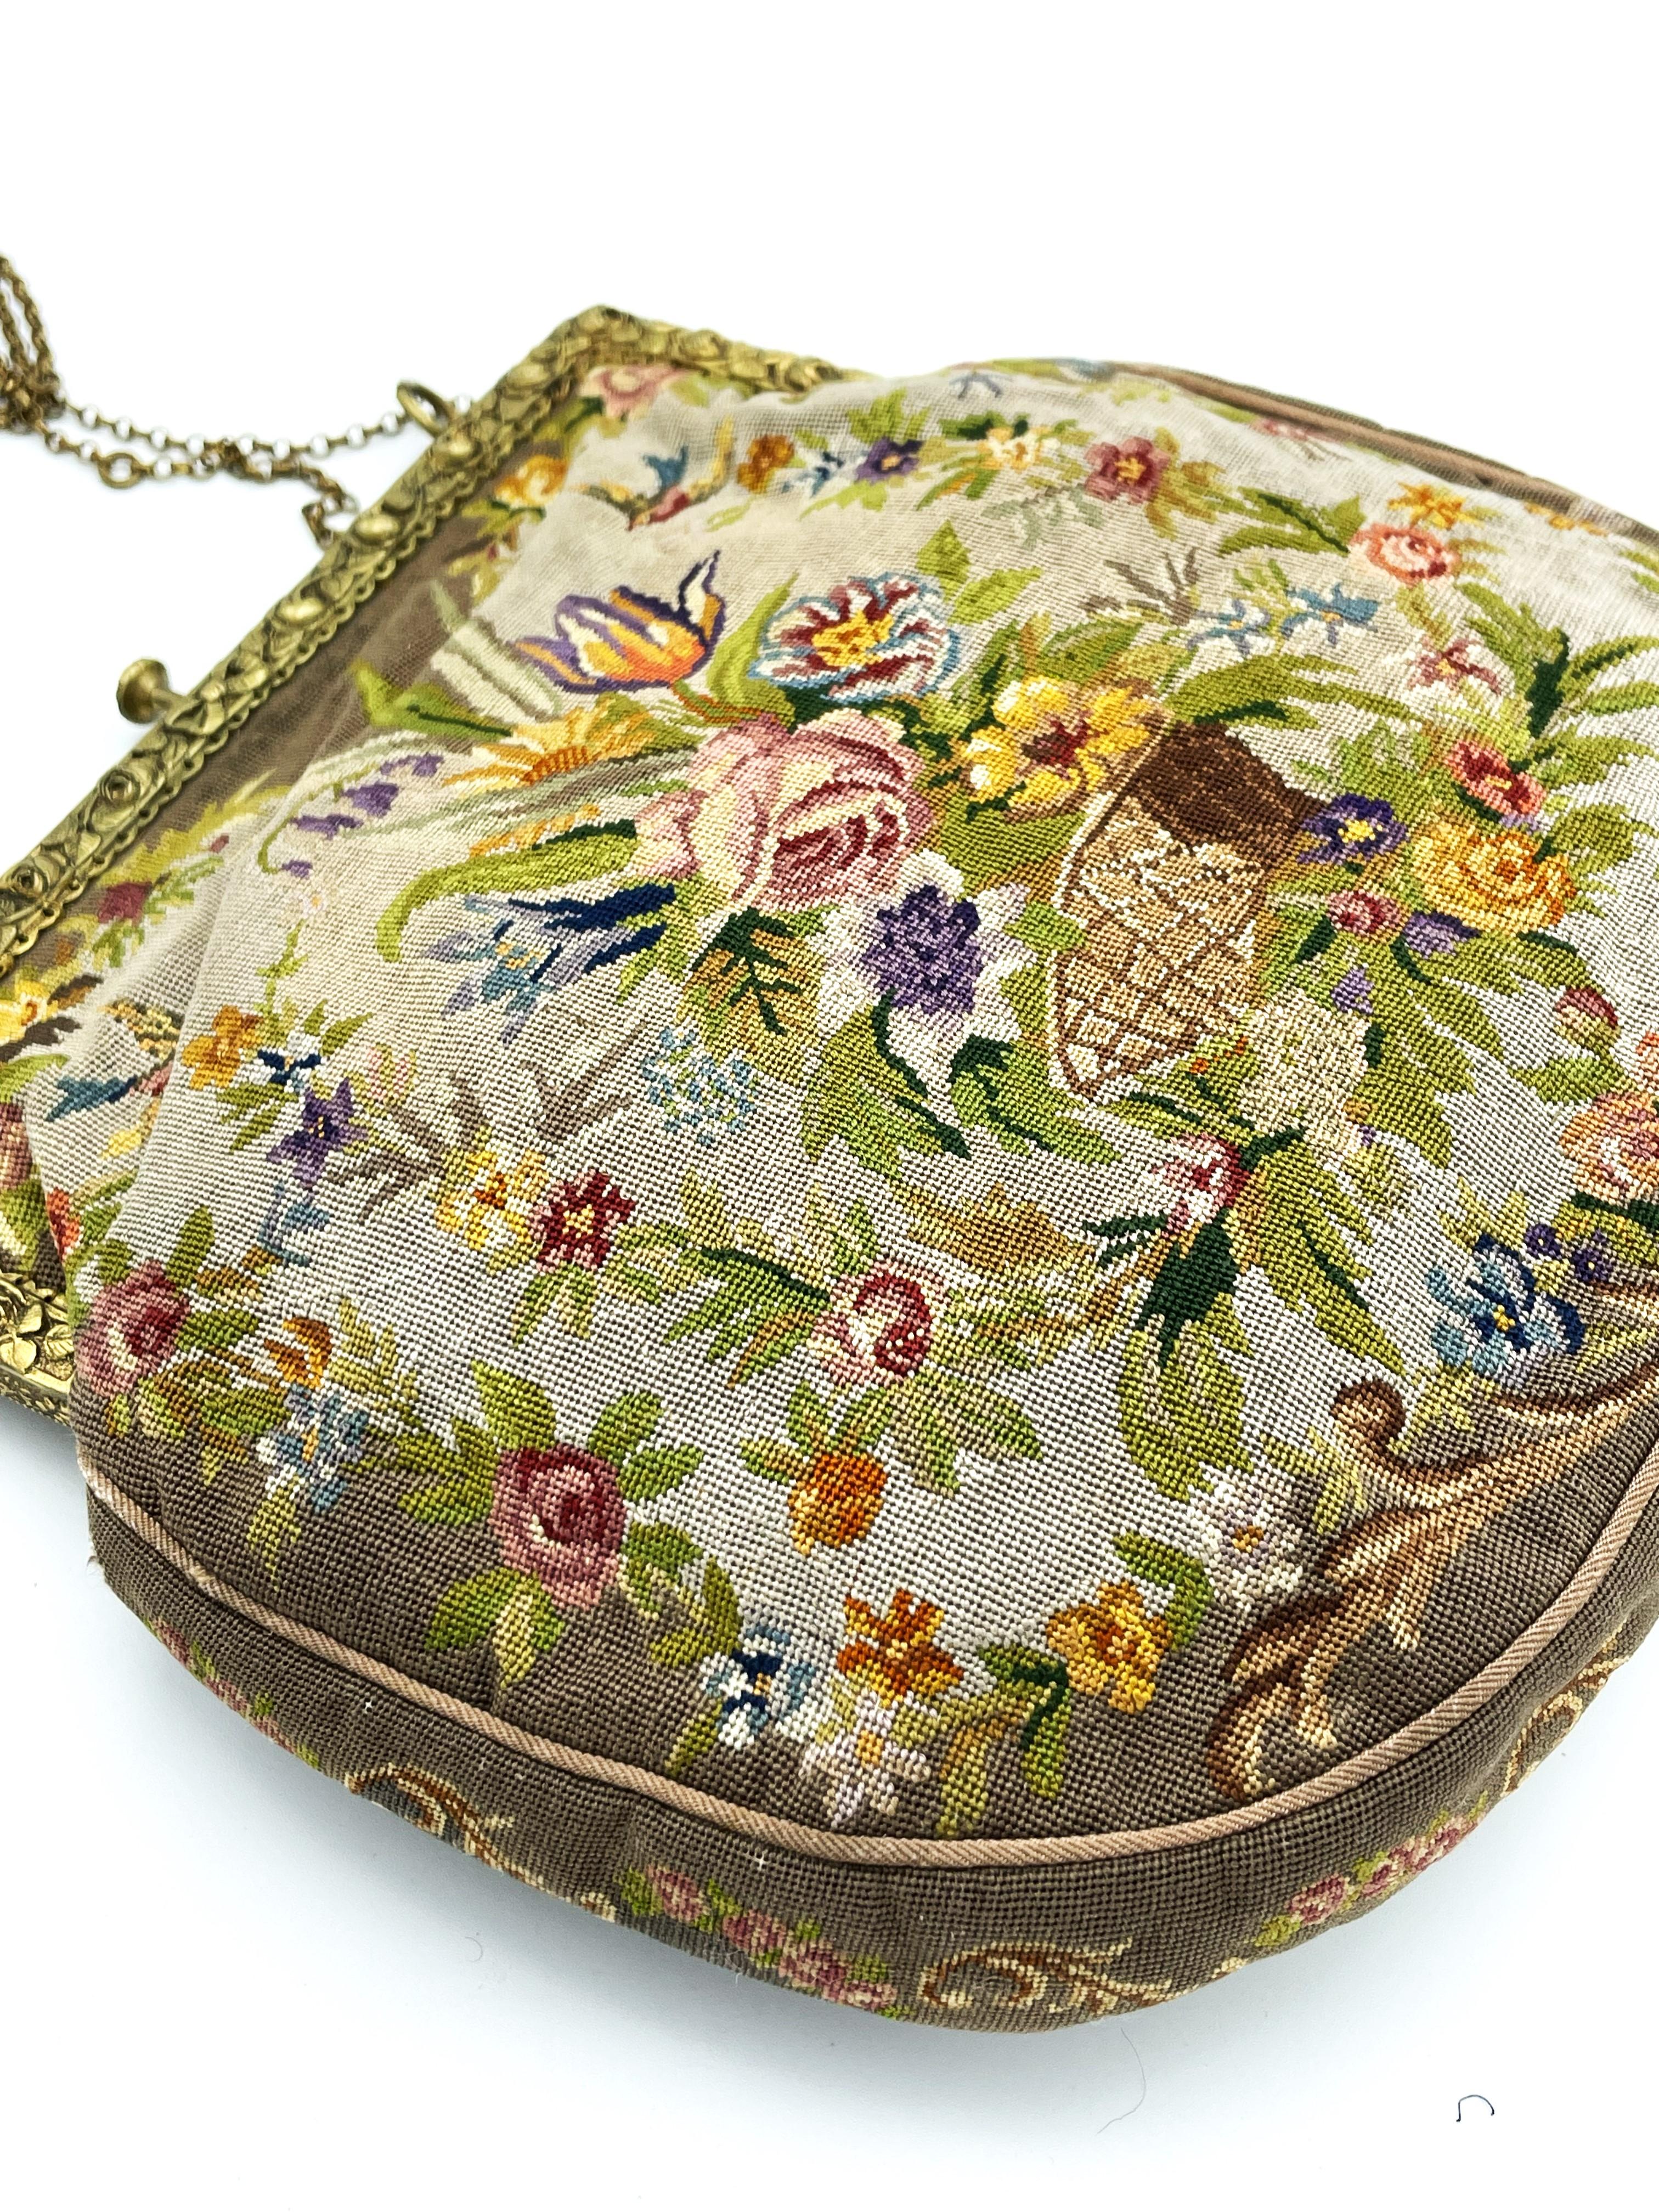 Hand-embroidered evening bag, petit point, brass bag hanger around 1900, Germany For Sale 7